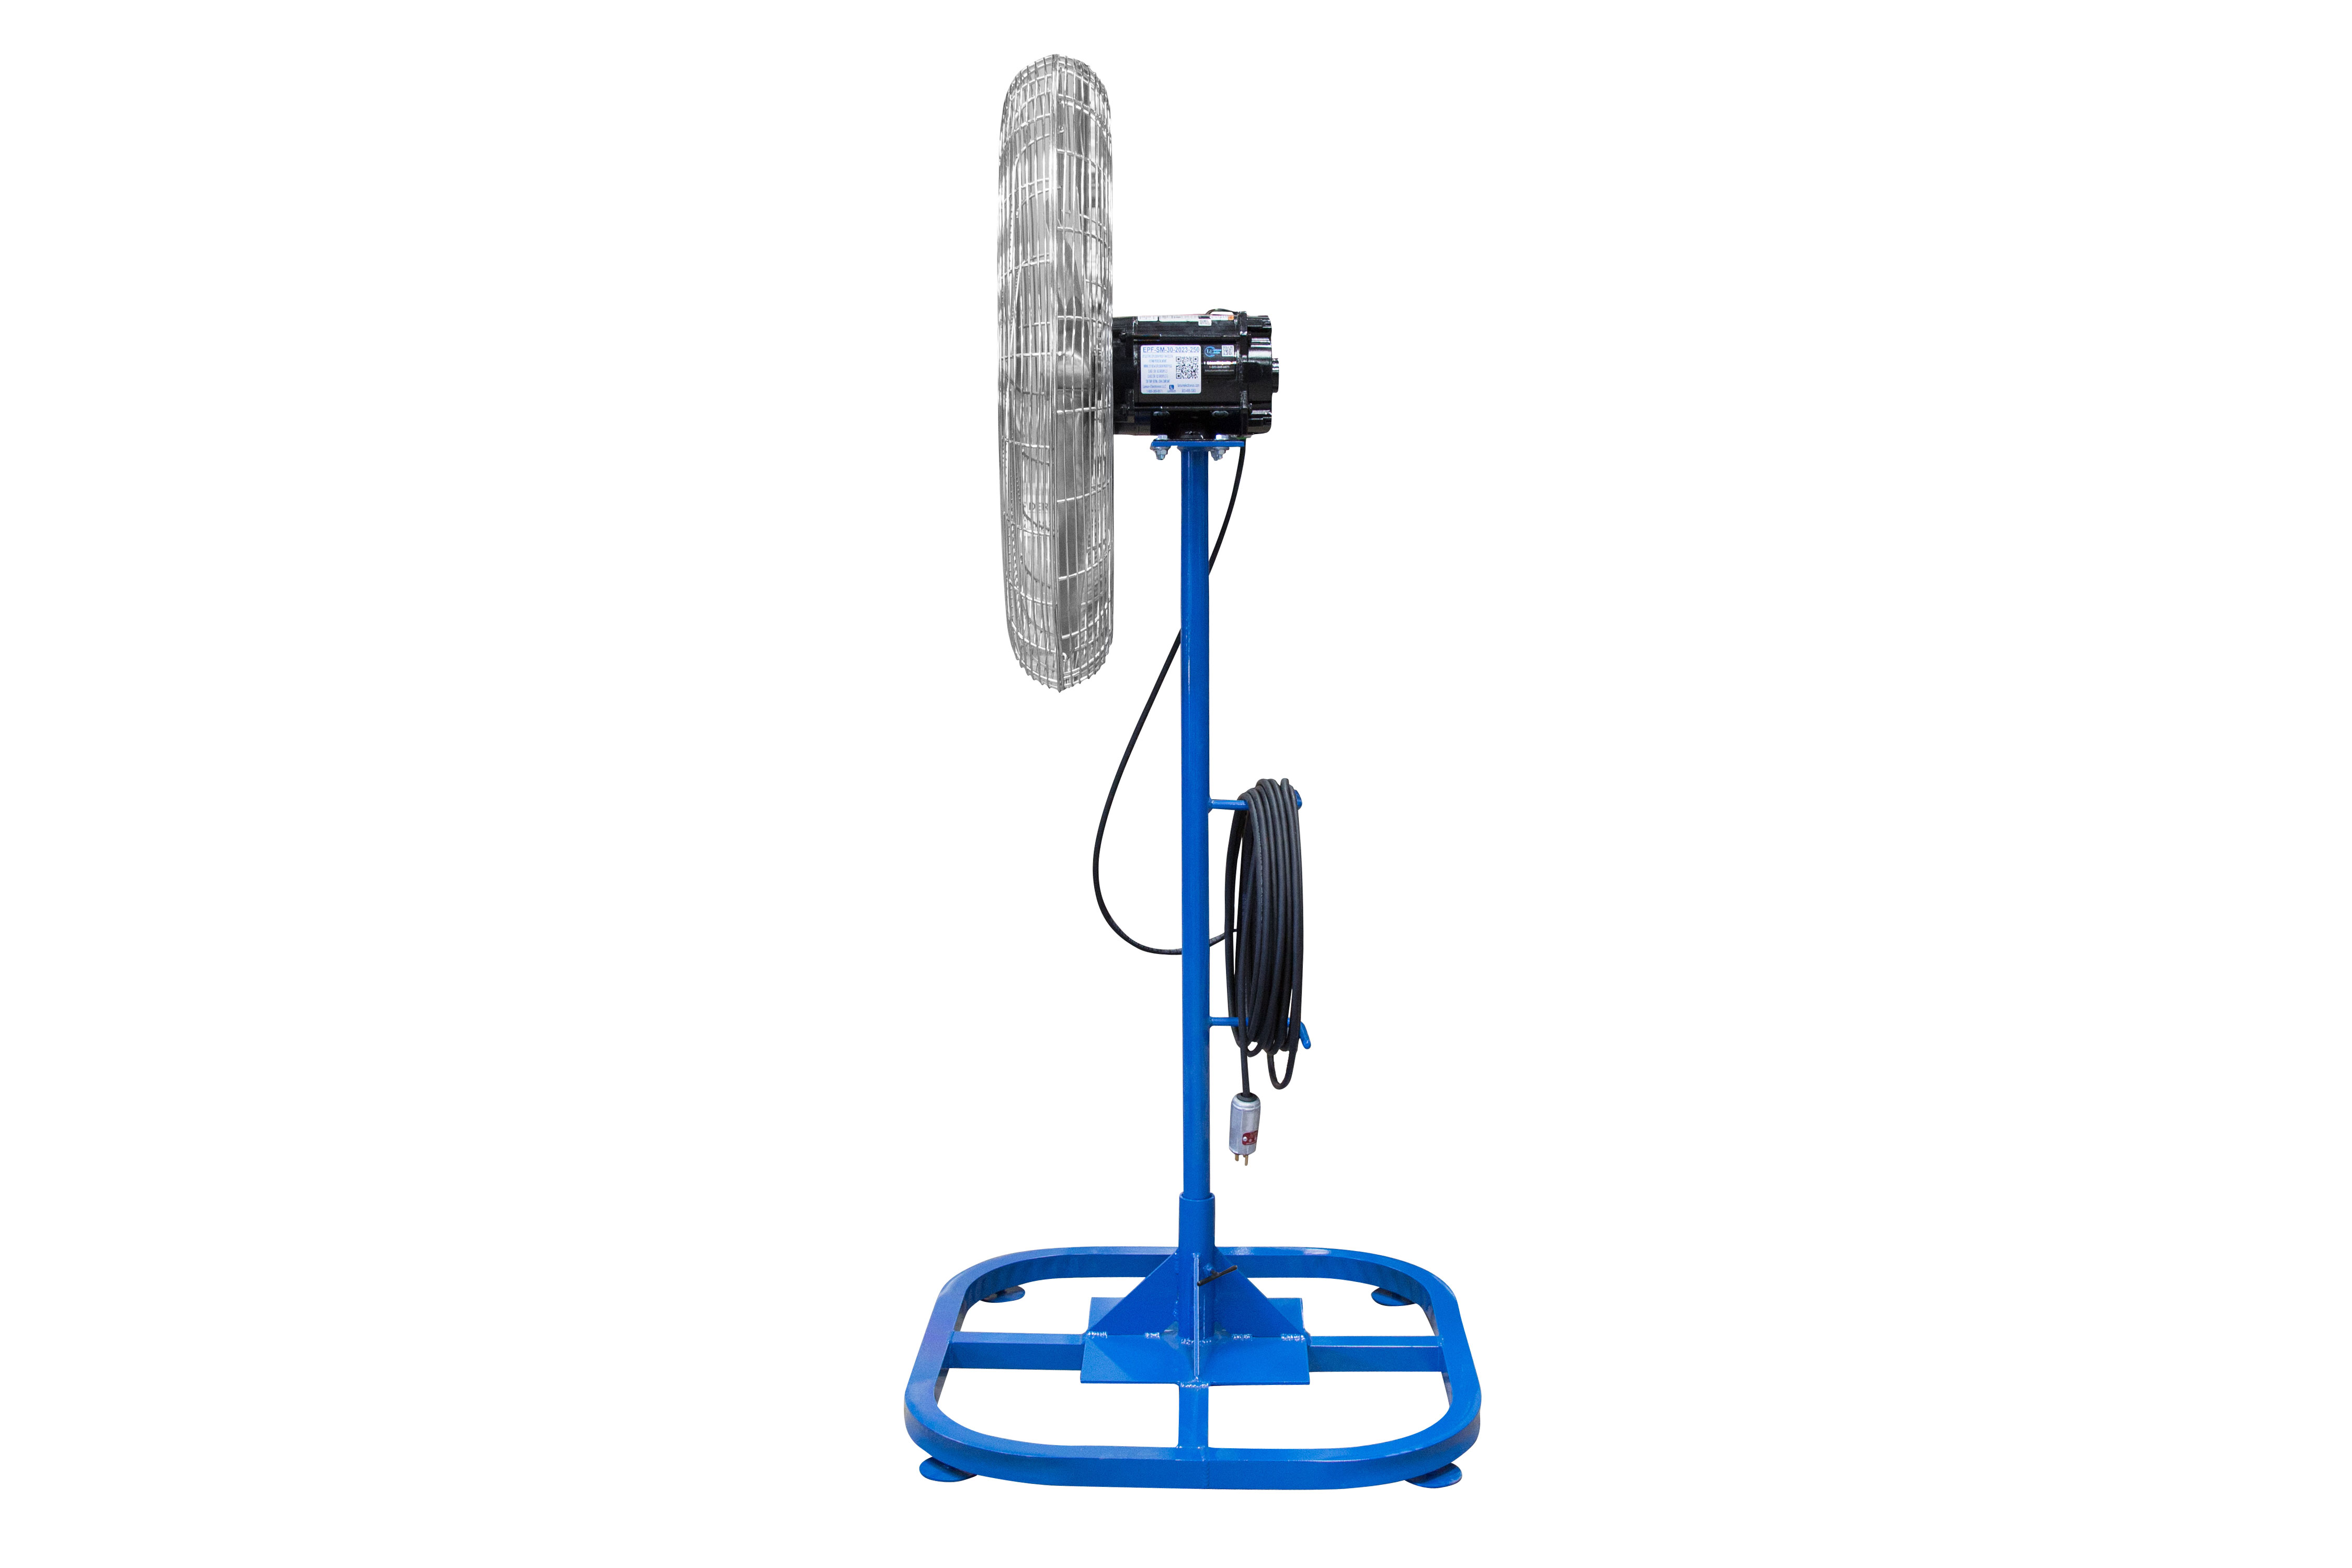 Pedestal mounted 30" Explosion Proof Fan with 100' Cord and Explosion Proof Cord Cap